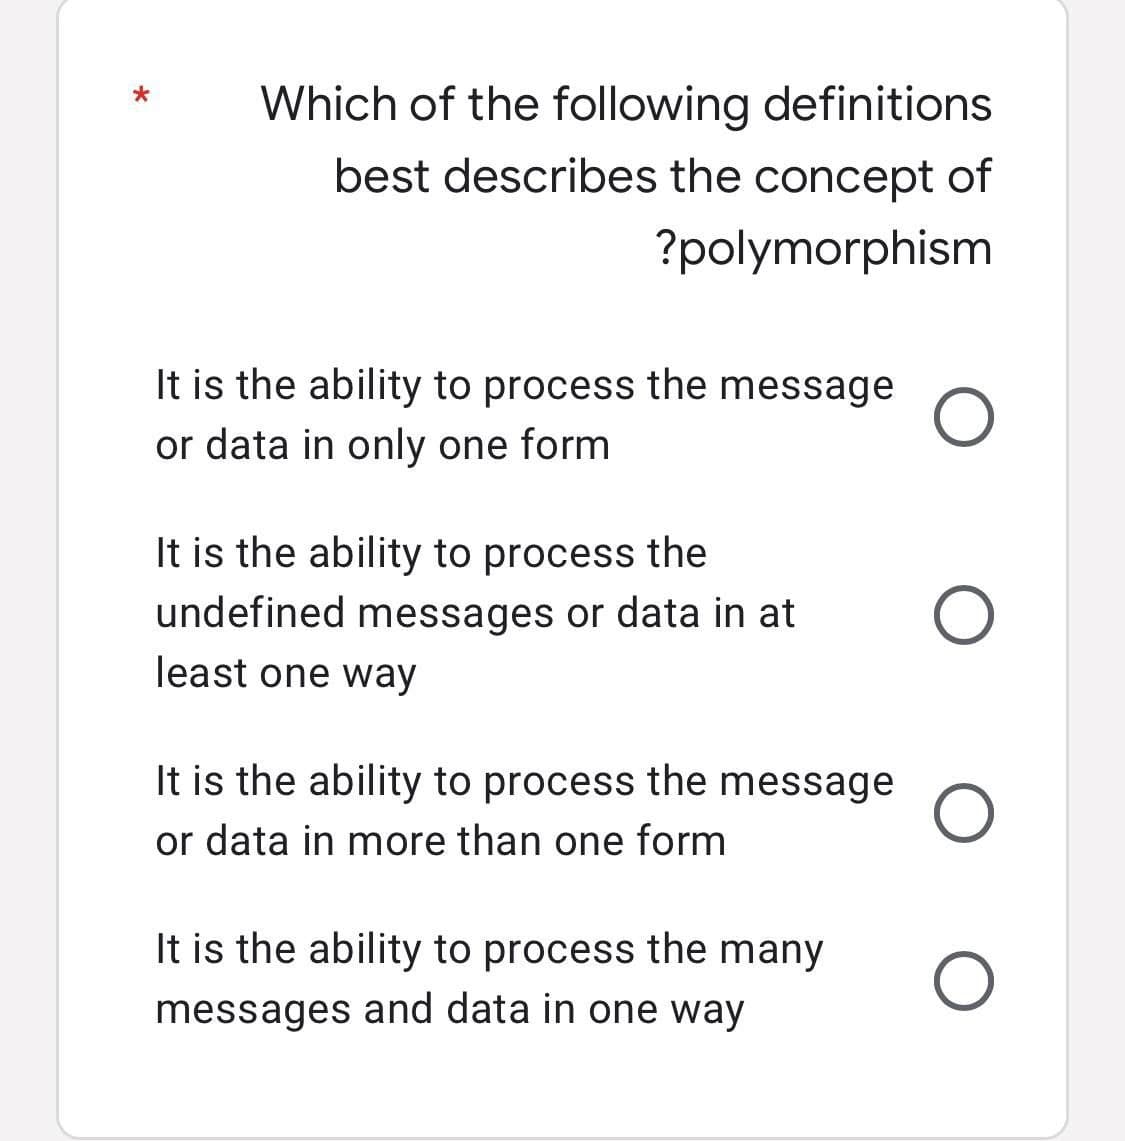 Which of the following definitions
best describes the concept of
?polymorphism
It is the ability to process the message
or data in only one form
It is the ability to process the
undefined messages or data in at
least one way
It is the ability to process the message
or data in more than one form
It is the ability to process the many
messages and data in one way
O
O